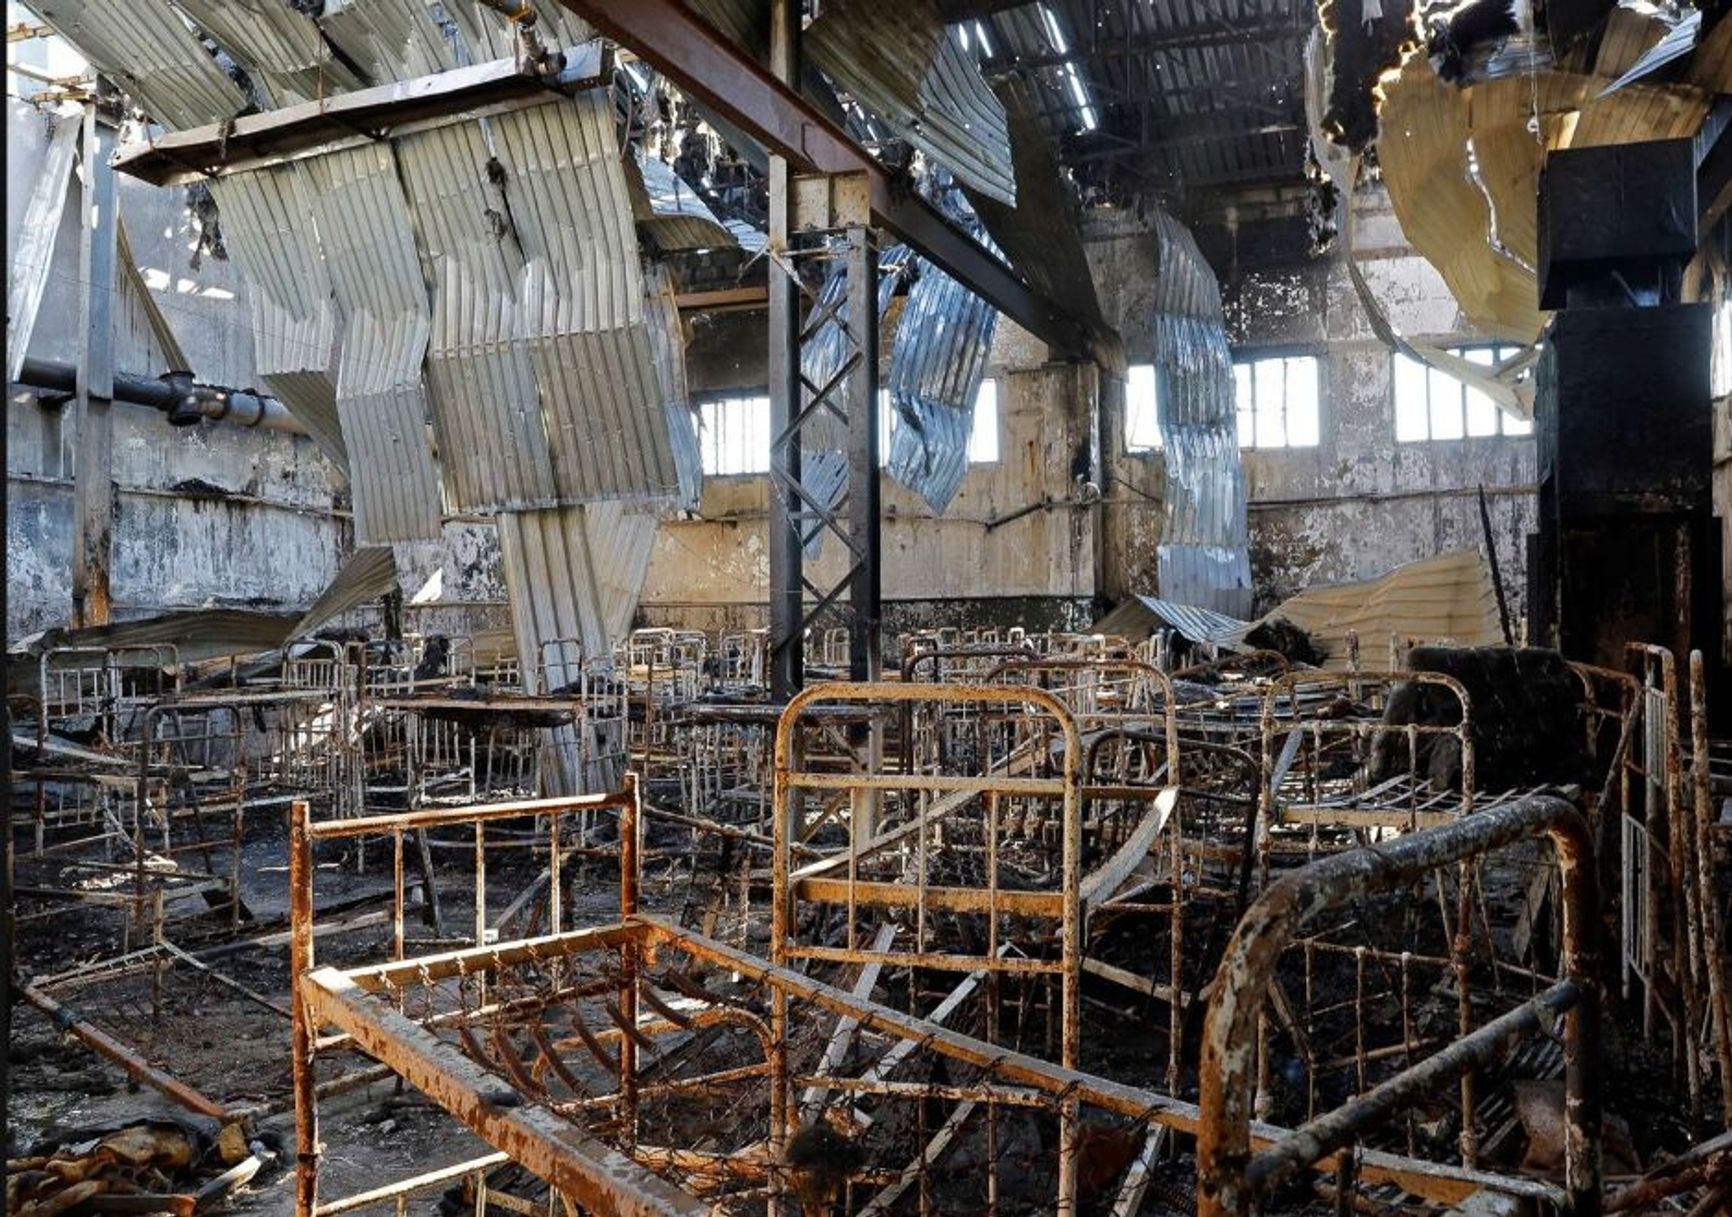 Inside a building at the Olenivka corrective colony where an explosion killed more than 50 Ukrainian POWs, August 10, 2022